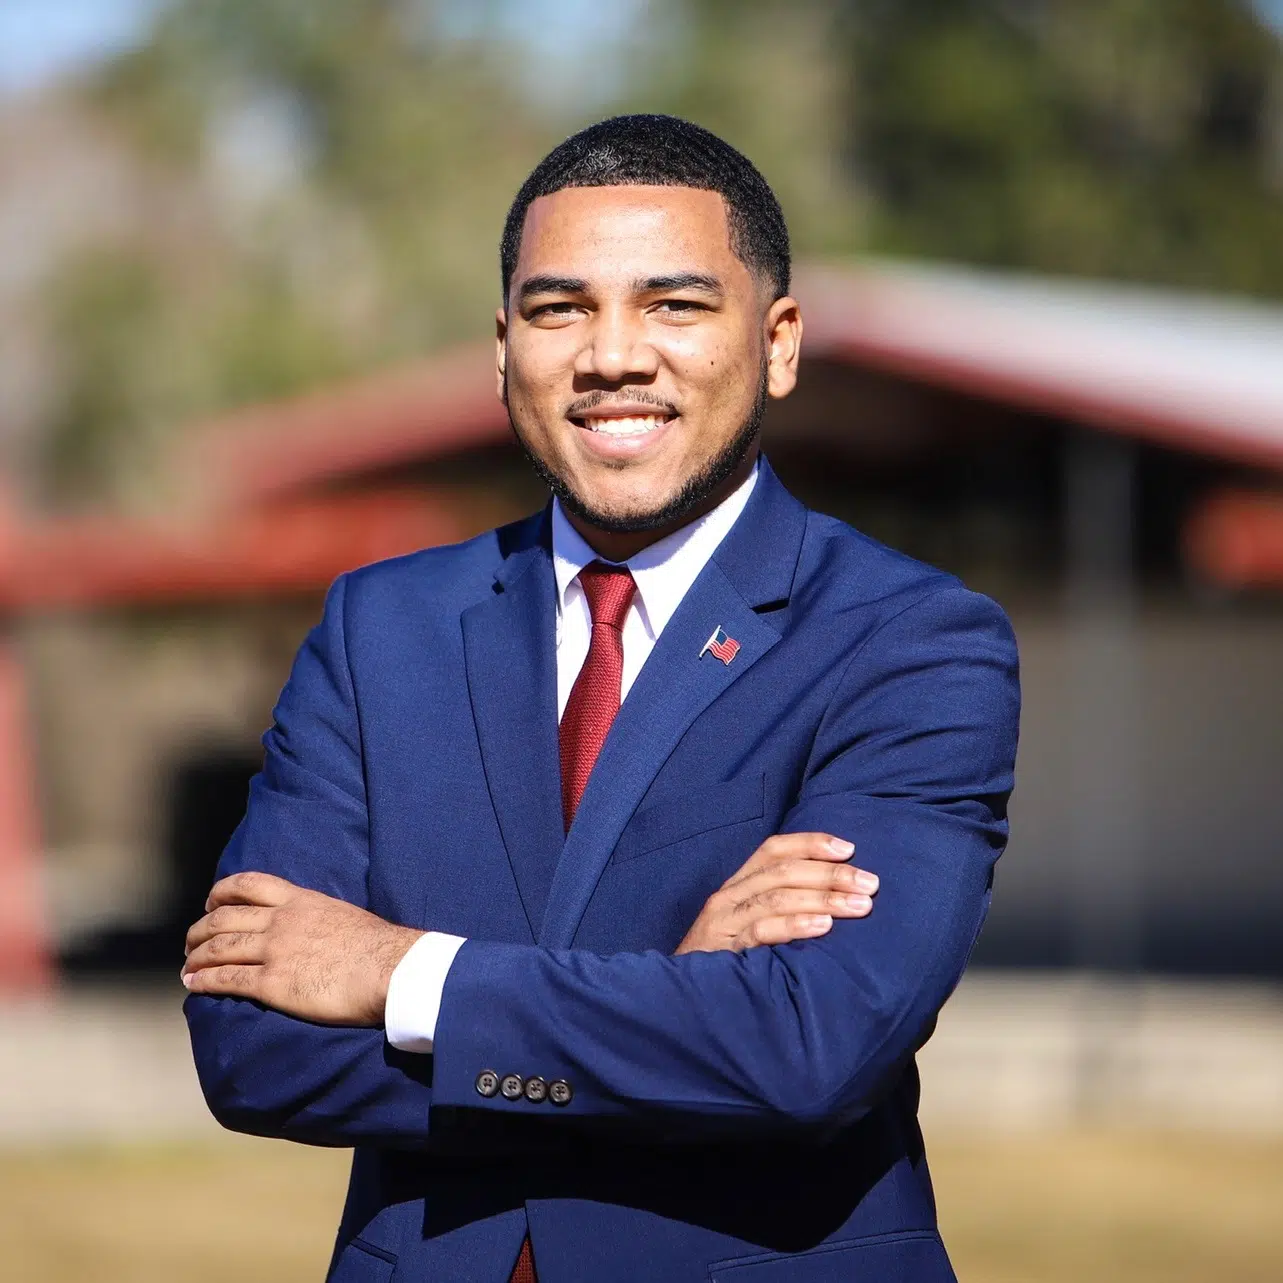 23 year old ousts two term mayor of Bogalusa